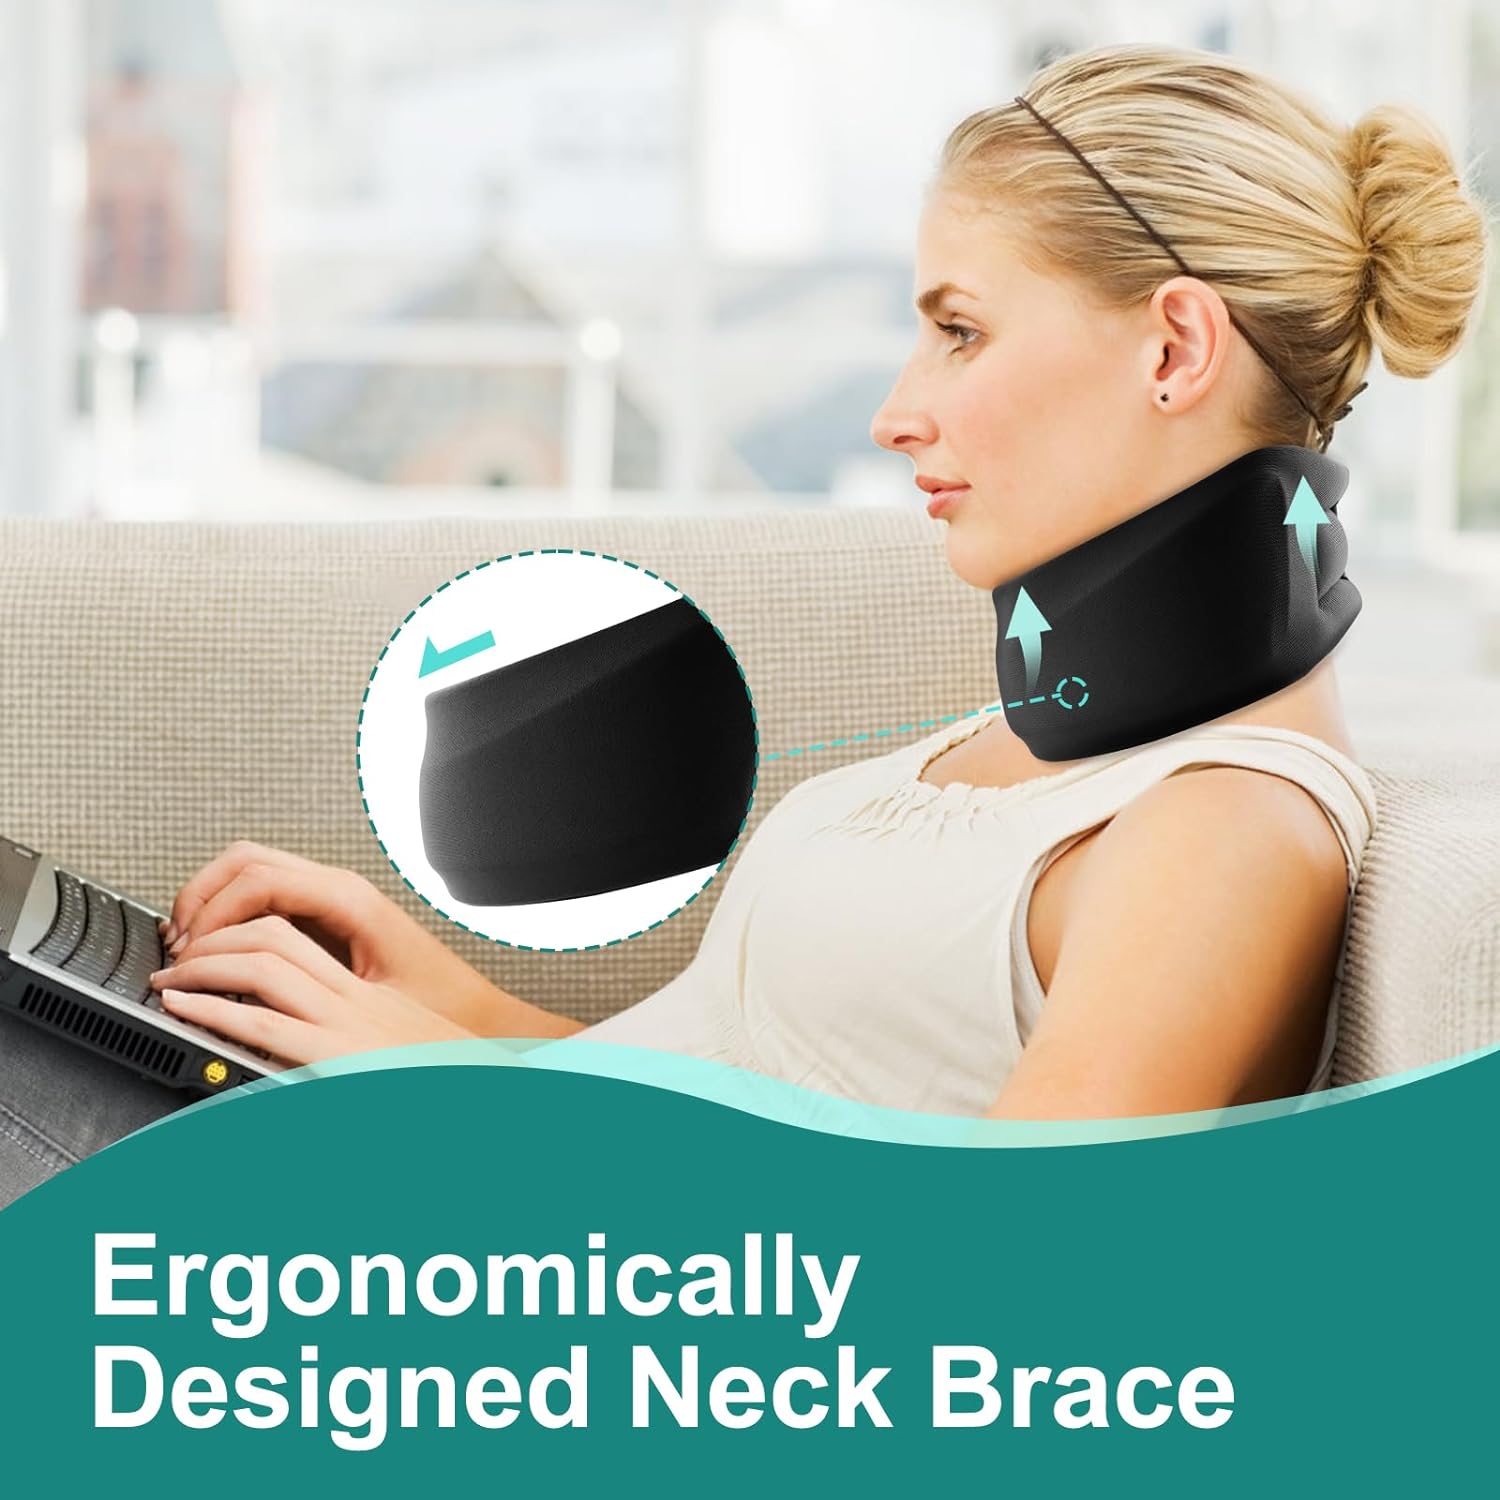 Soft Foam Neck Brace Cervical Collar-Hotodeal Neck Brace for Neck Pain and Support